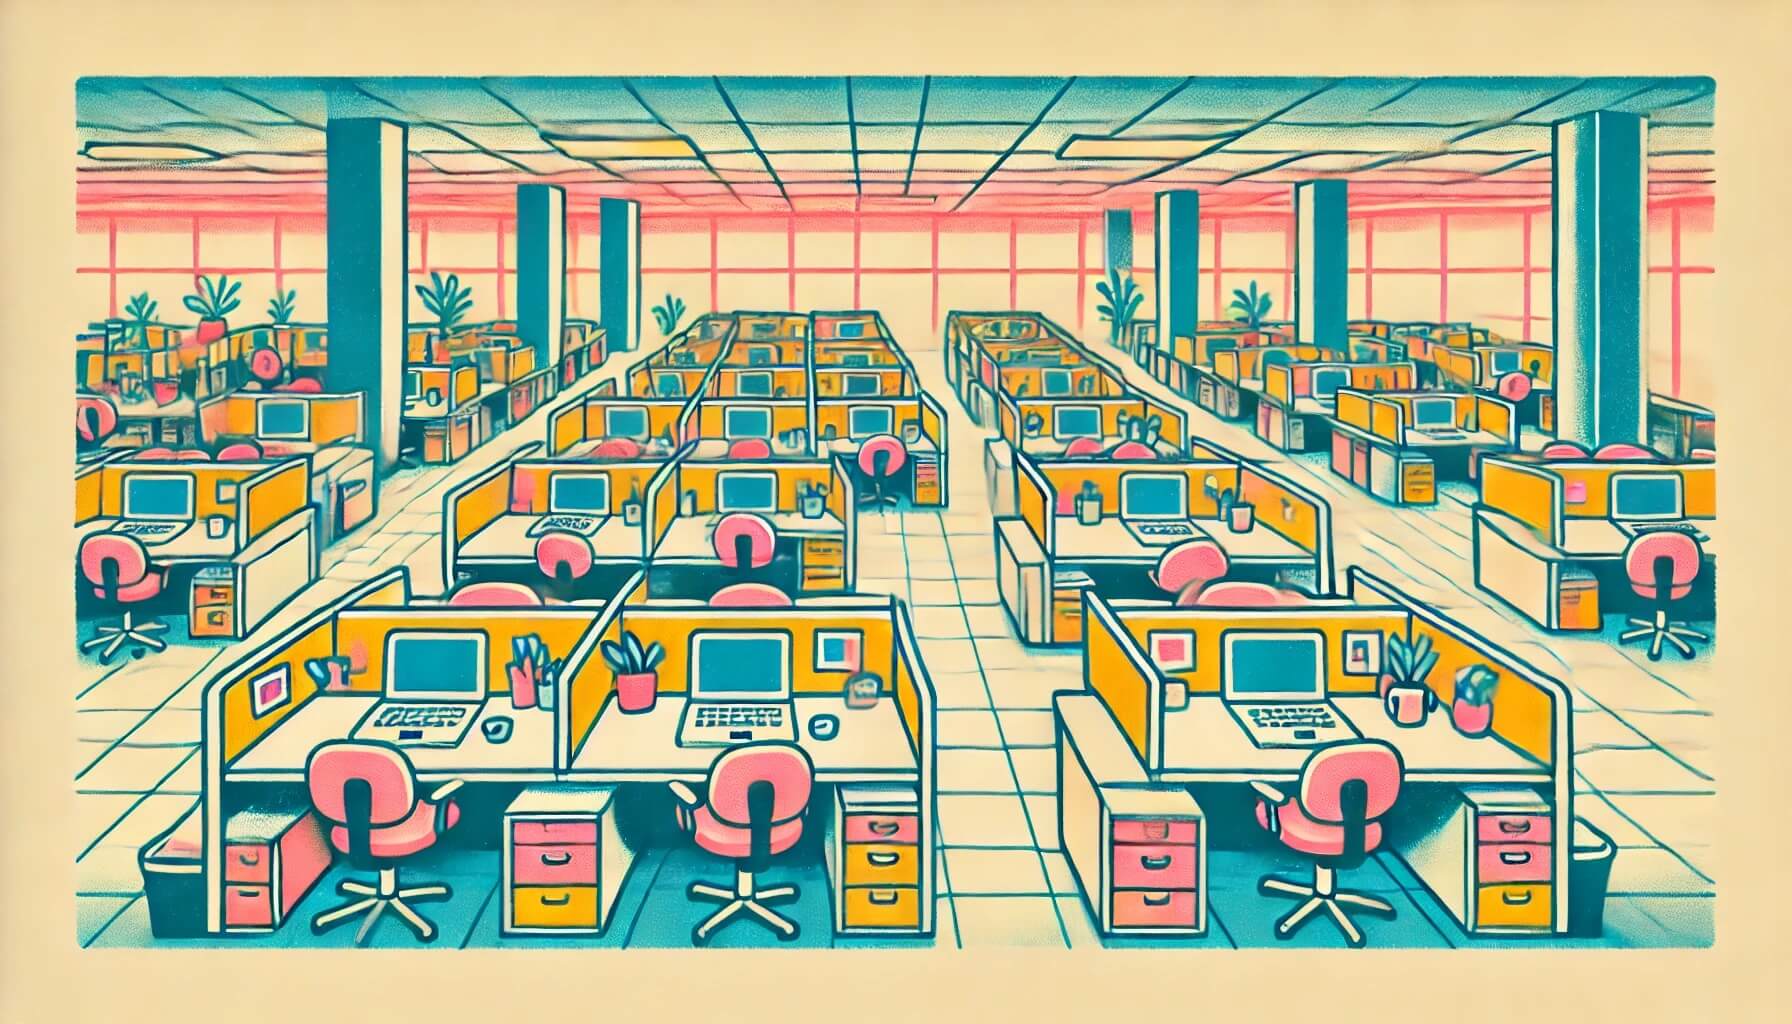 A vintage-style illustration of rows of empty office cubicles 